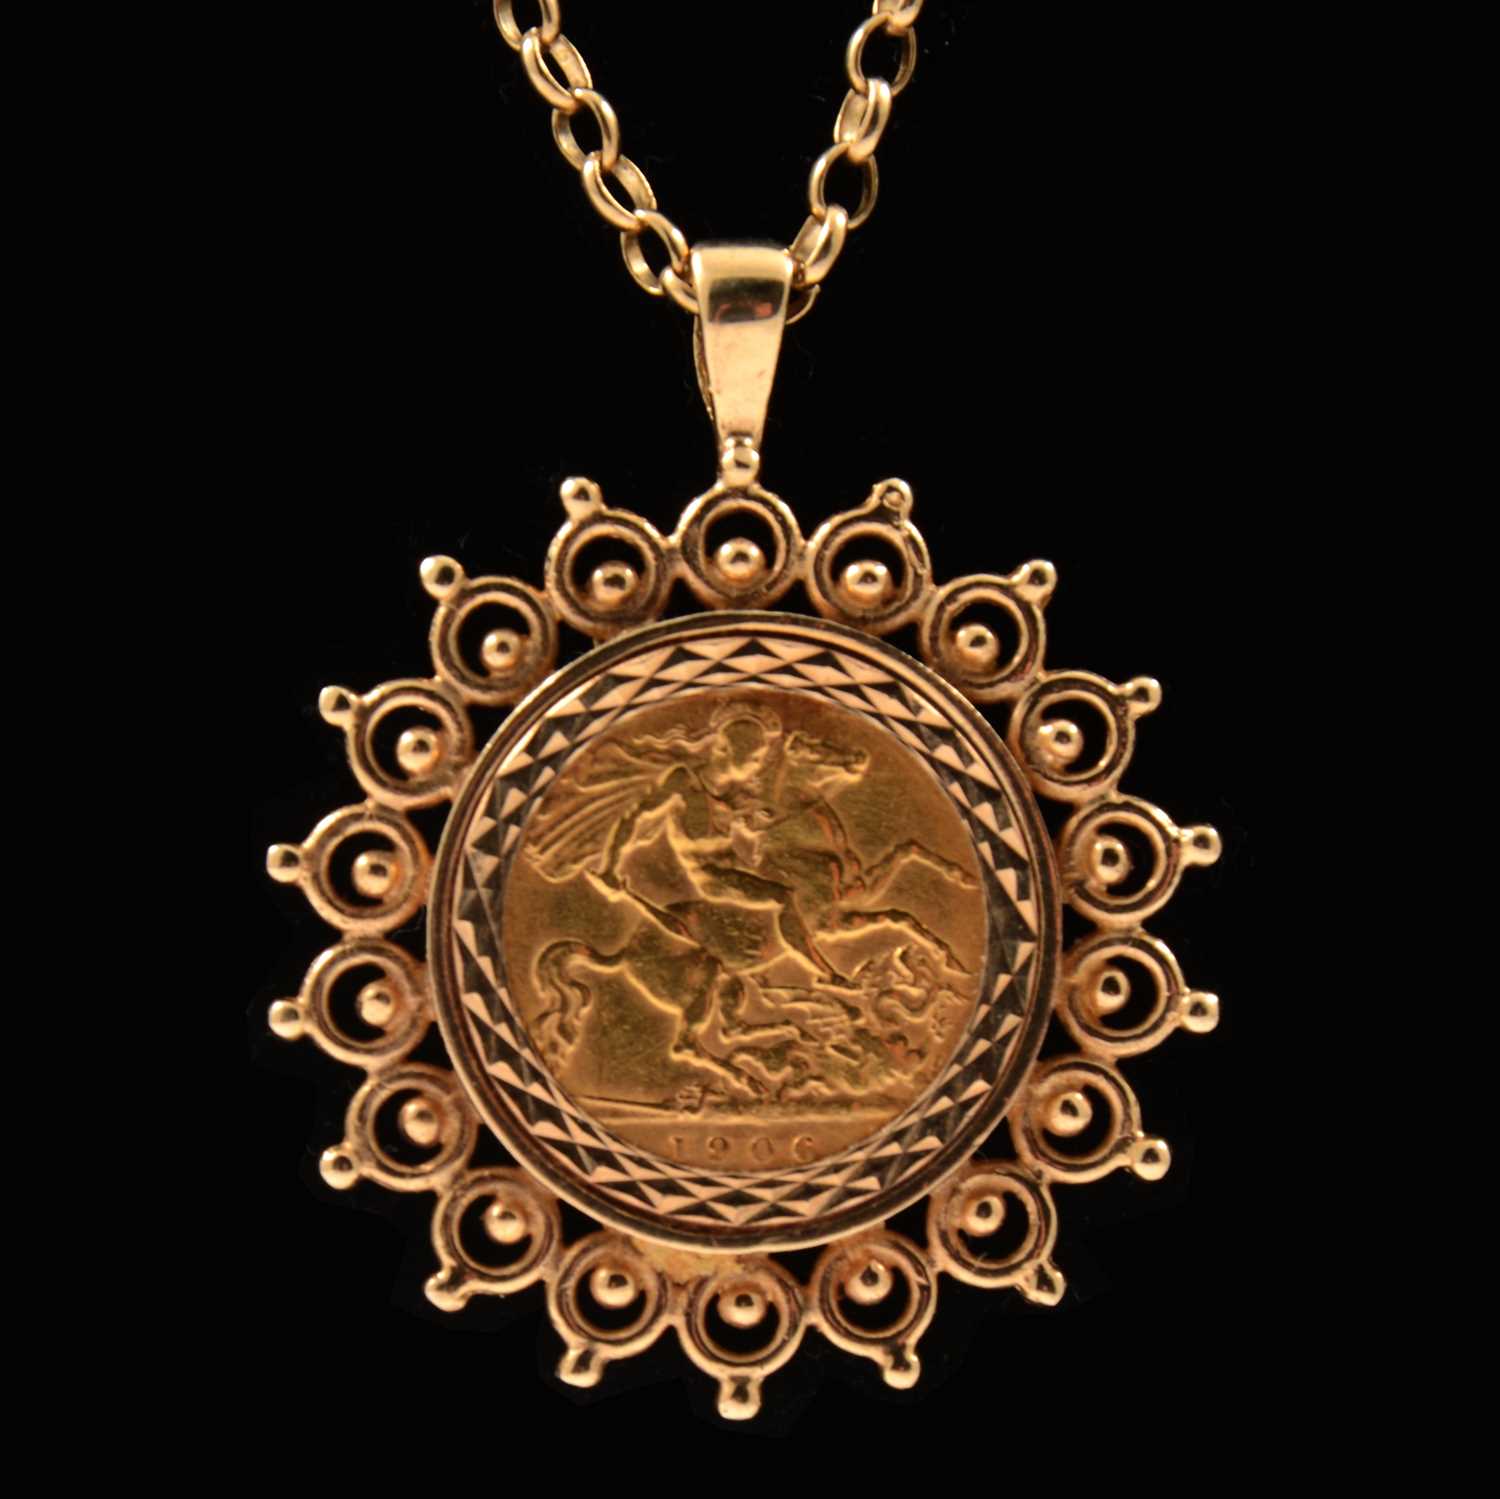 Lot 89 - A Gold Half Sovereign pendant and chain.